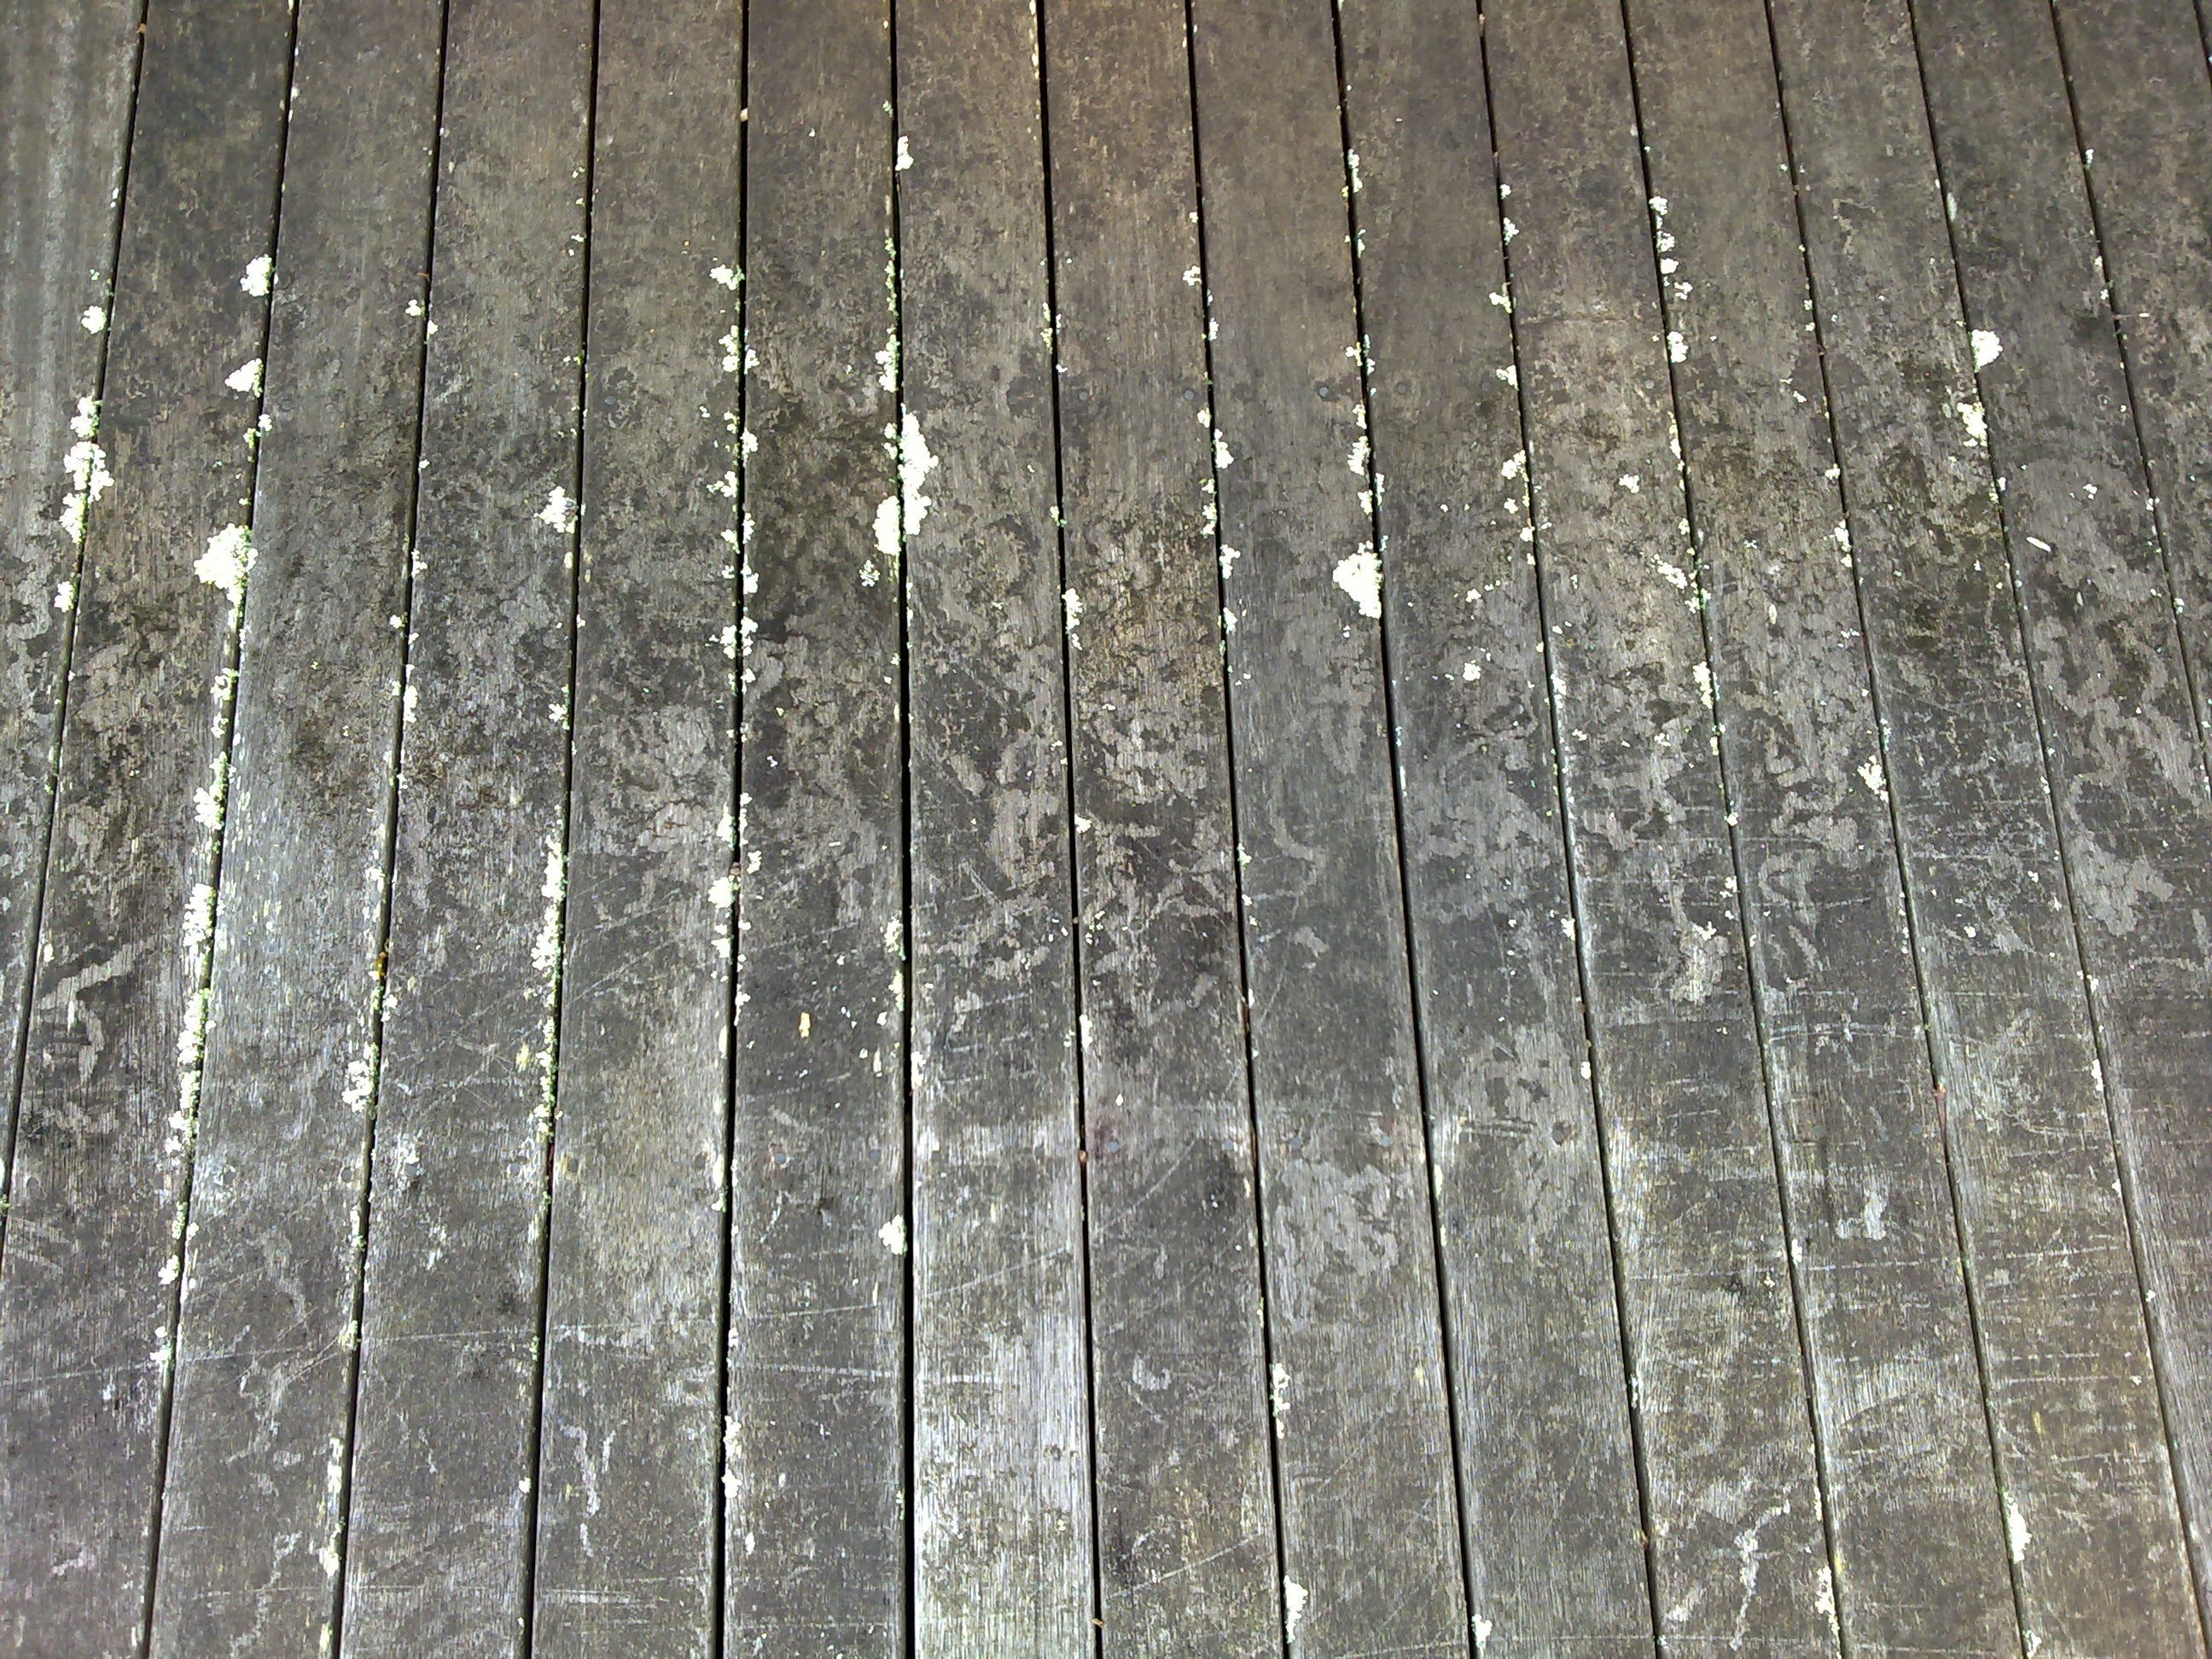 Hardwood Timber Deck with Lichen, Black and Green Algae